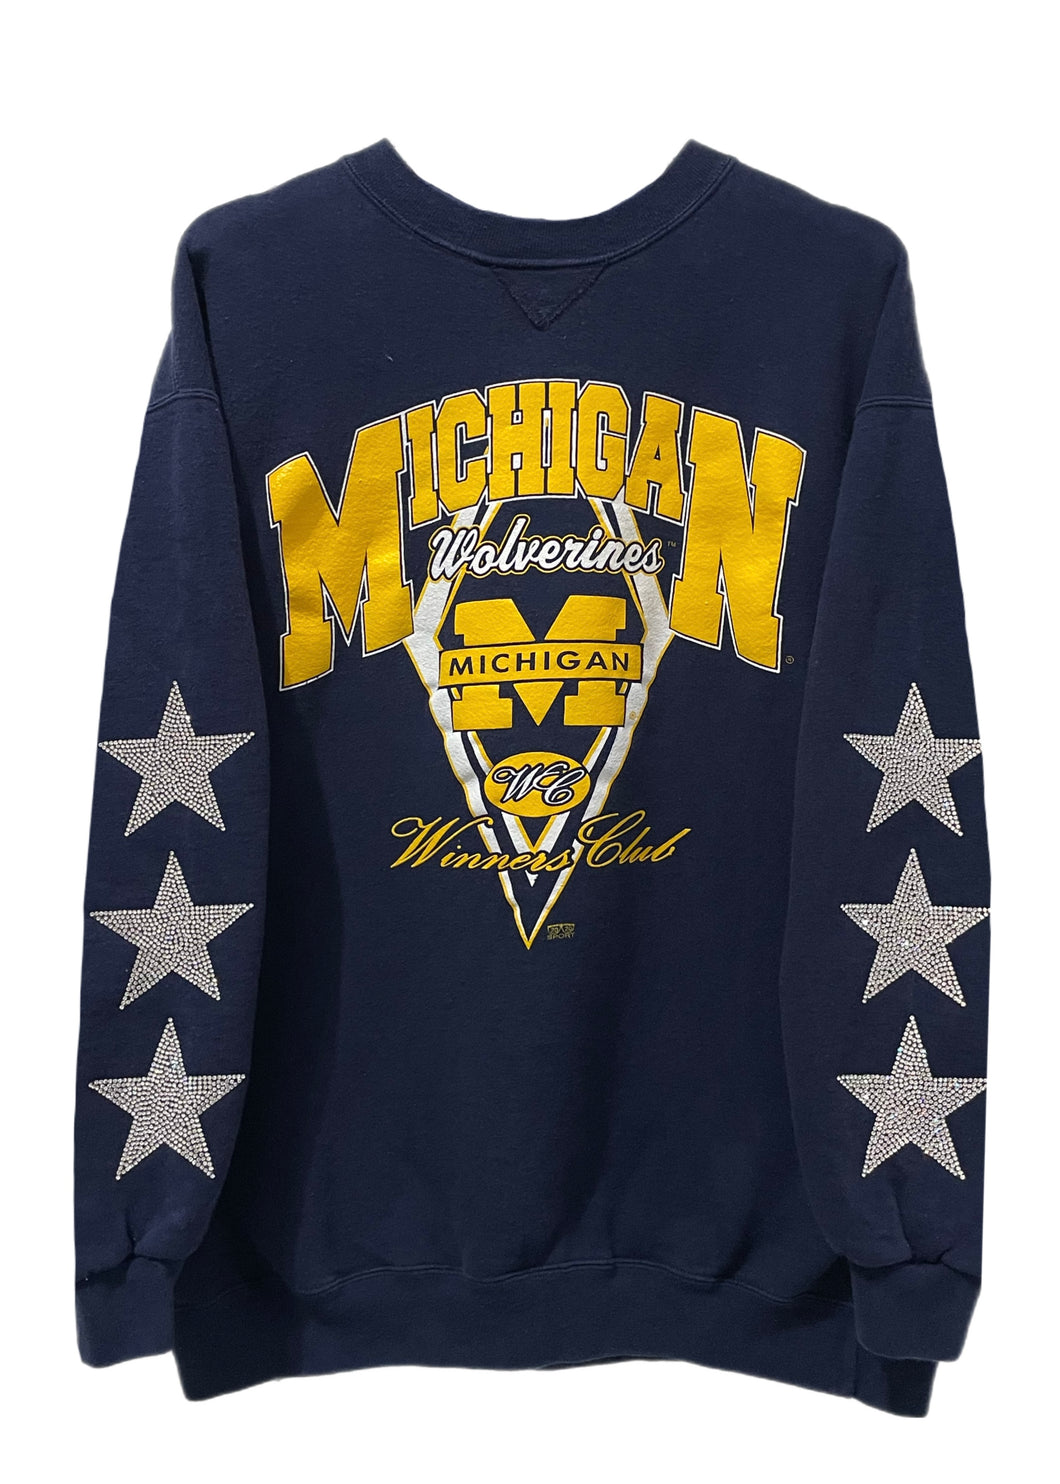 University of Michigan, One of a KIND Vintage UMich Sweatshirt with Three Crystal Star Design